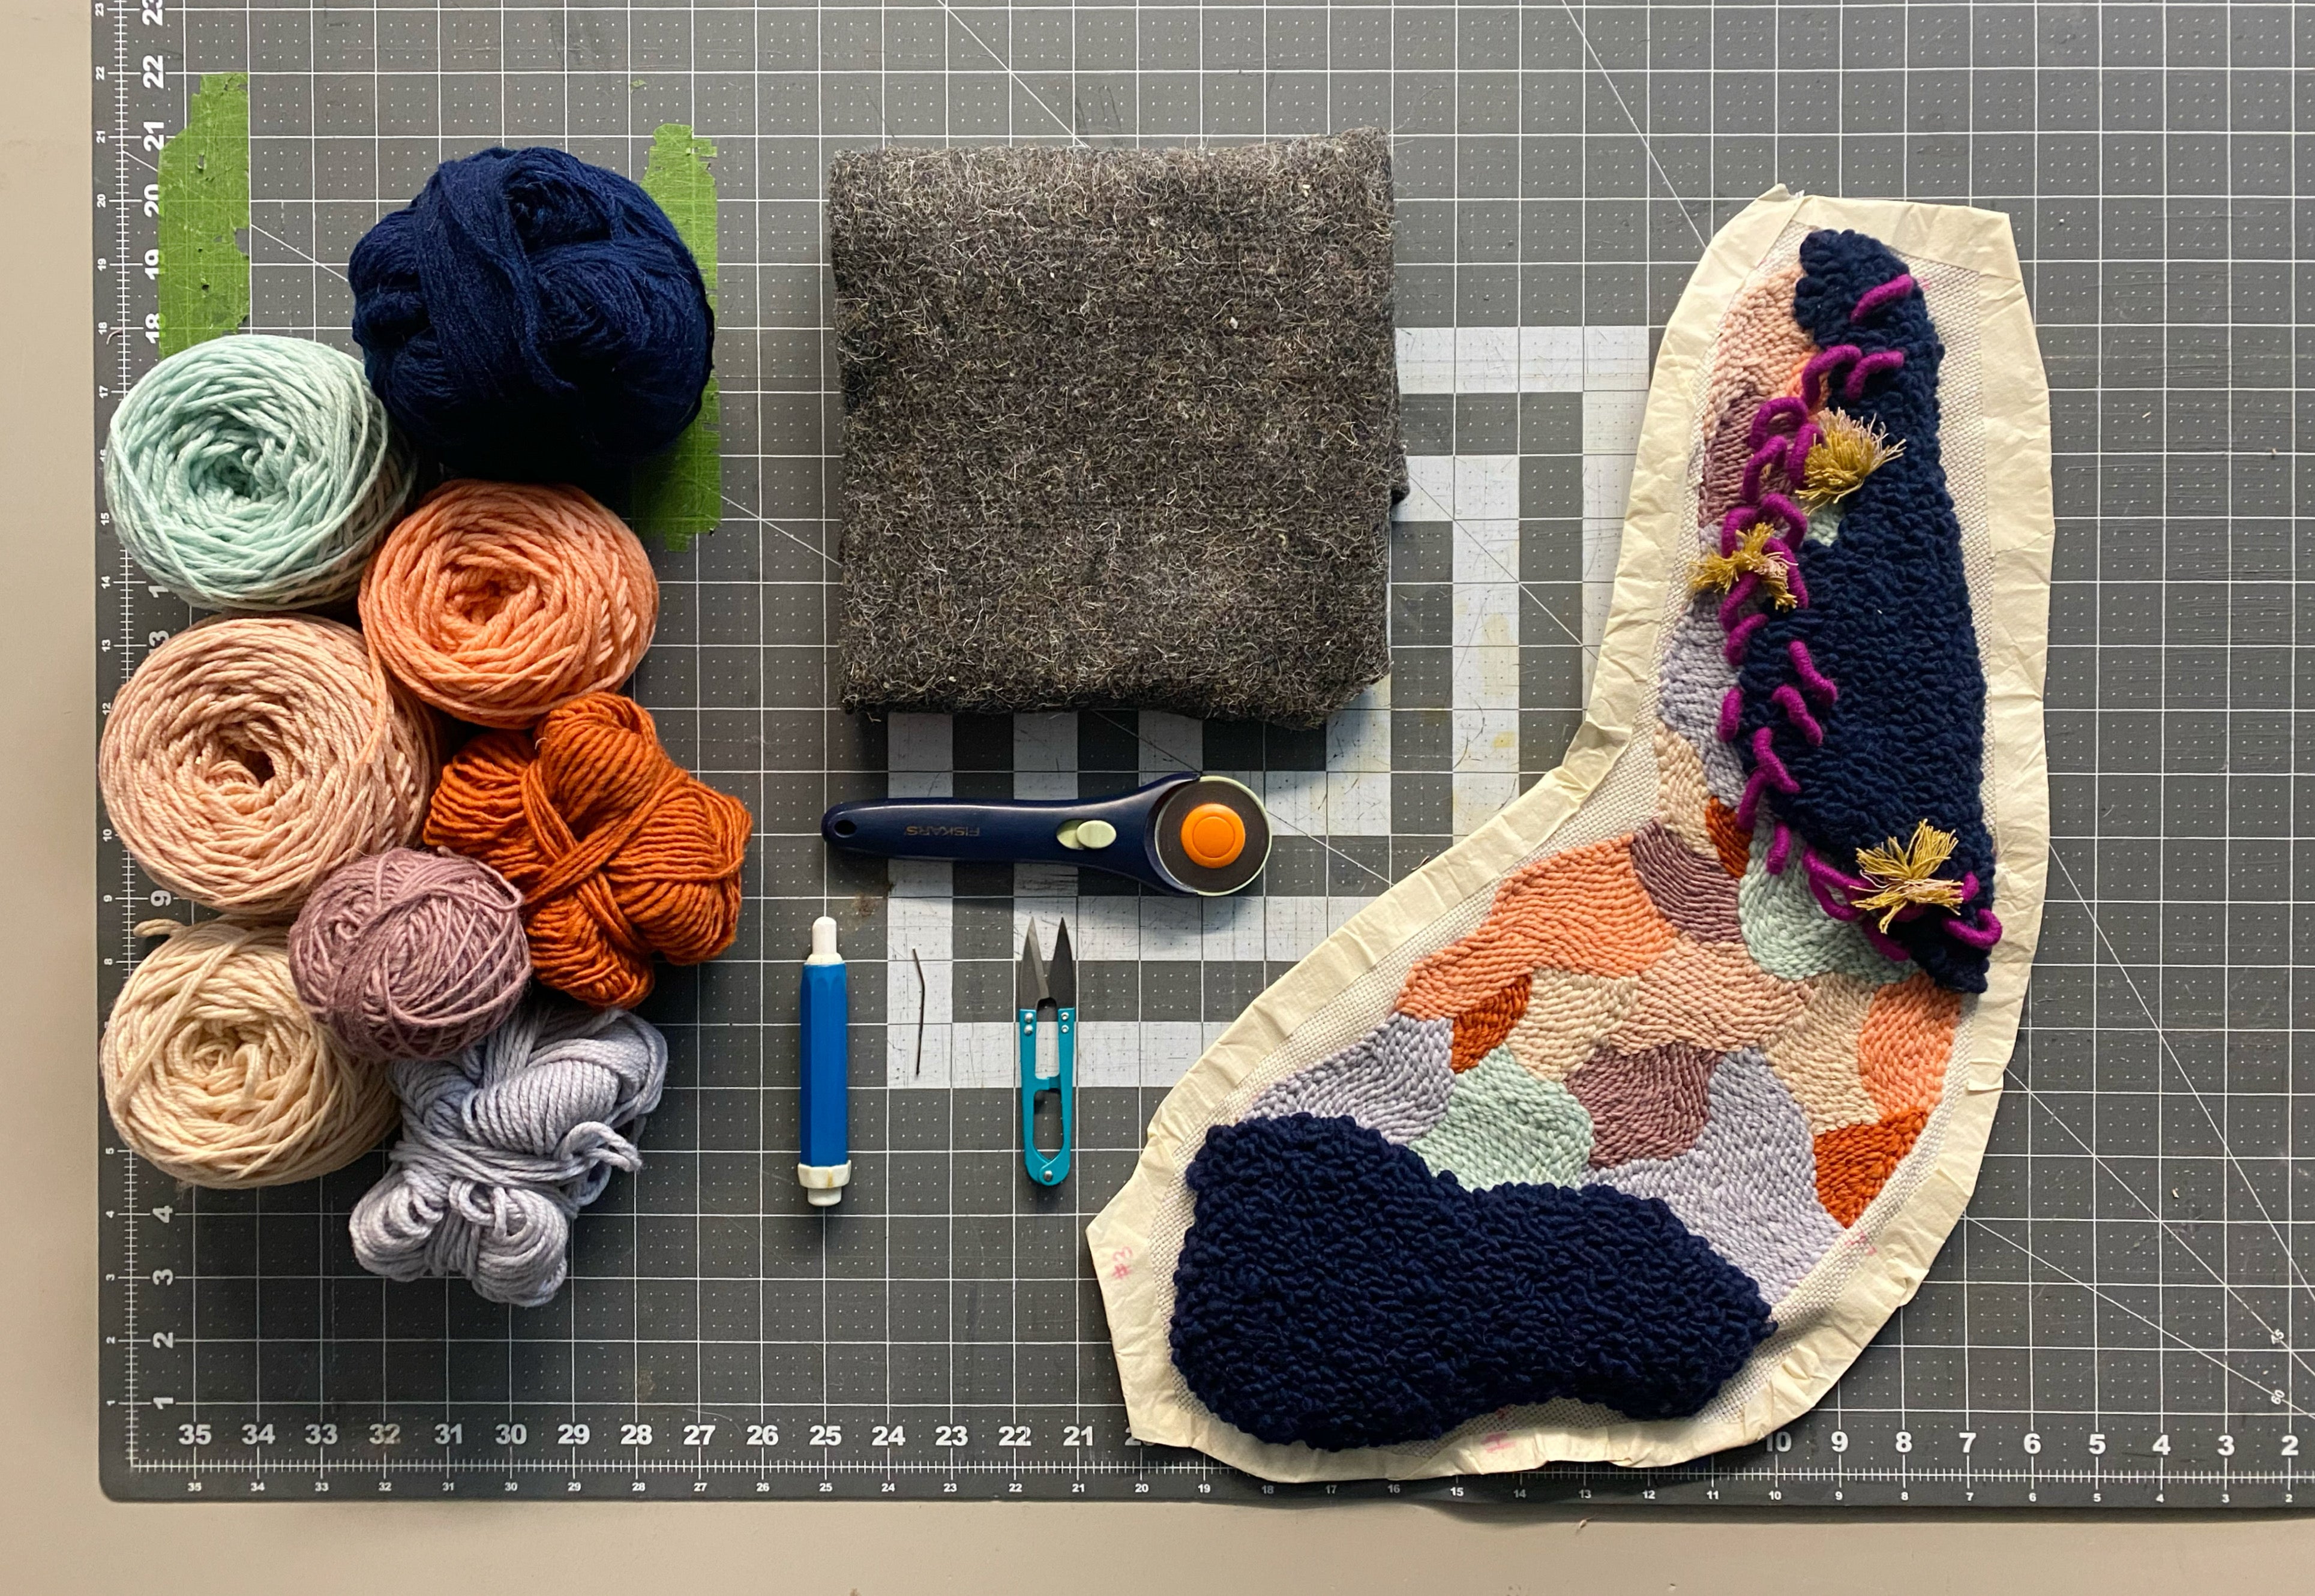 How To Back Punch Needle Projects with Industrial Felt Featuring Katie Berman Tutorial Materials